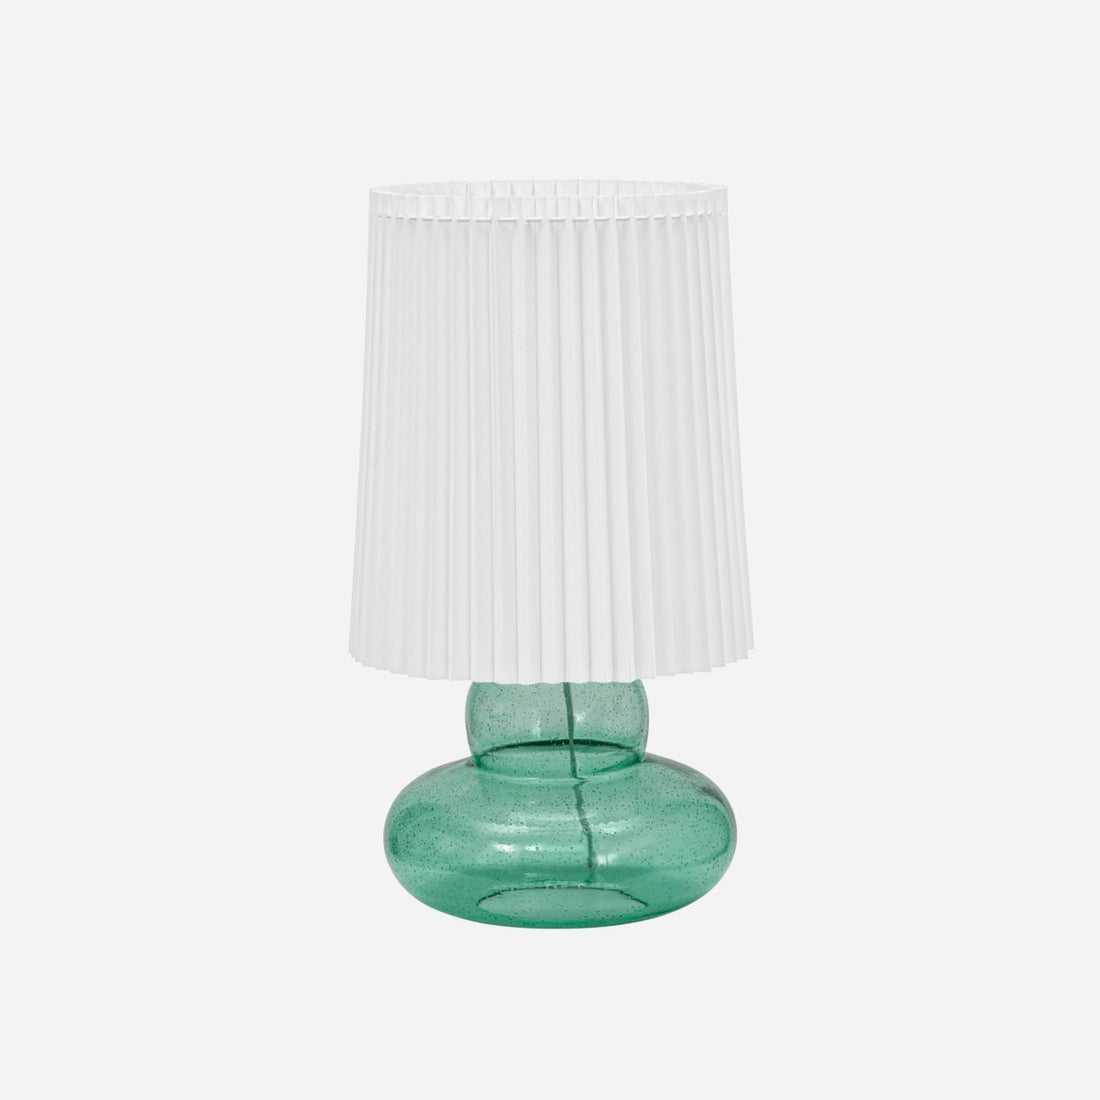 House Doctor table lamp incl. Lampshade, Ribe, Green-H: 55 cm, DIA: 27.5 cm